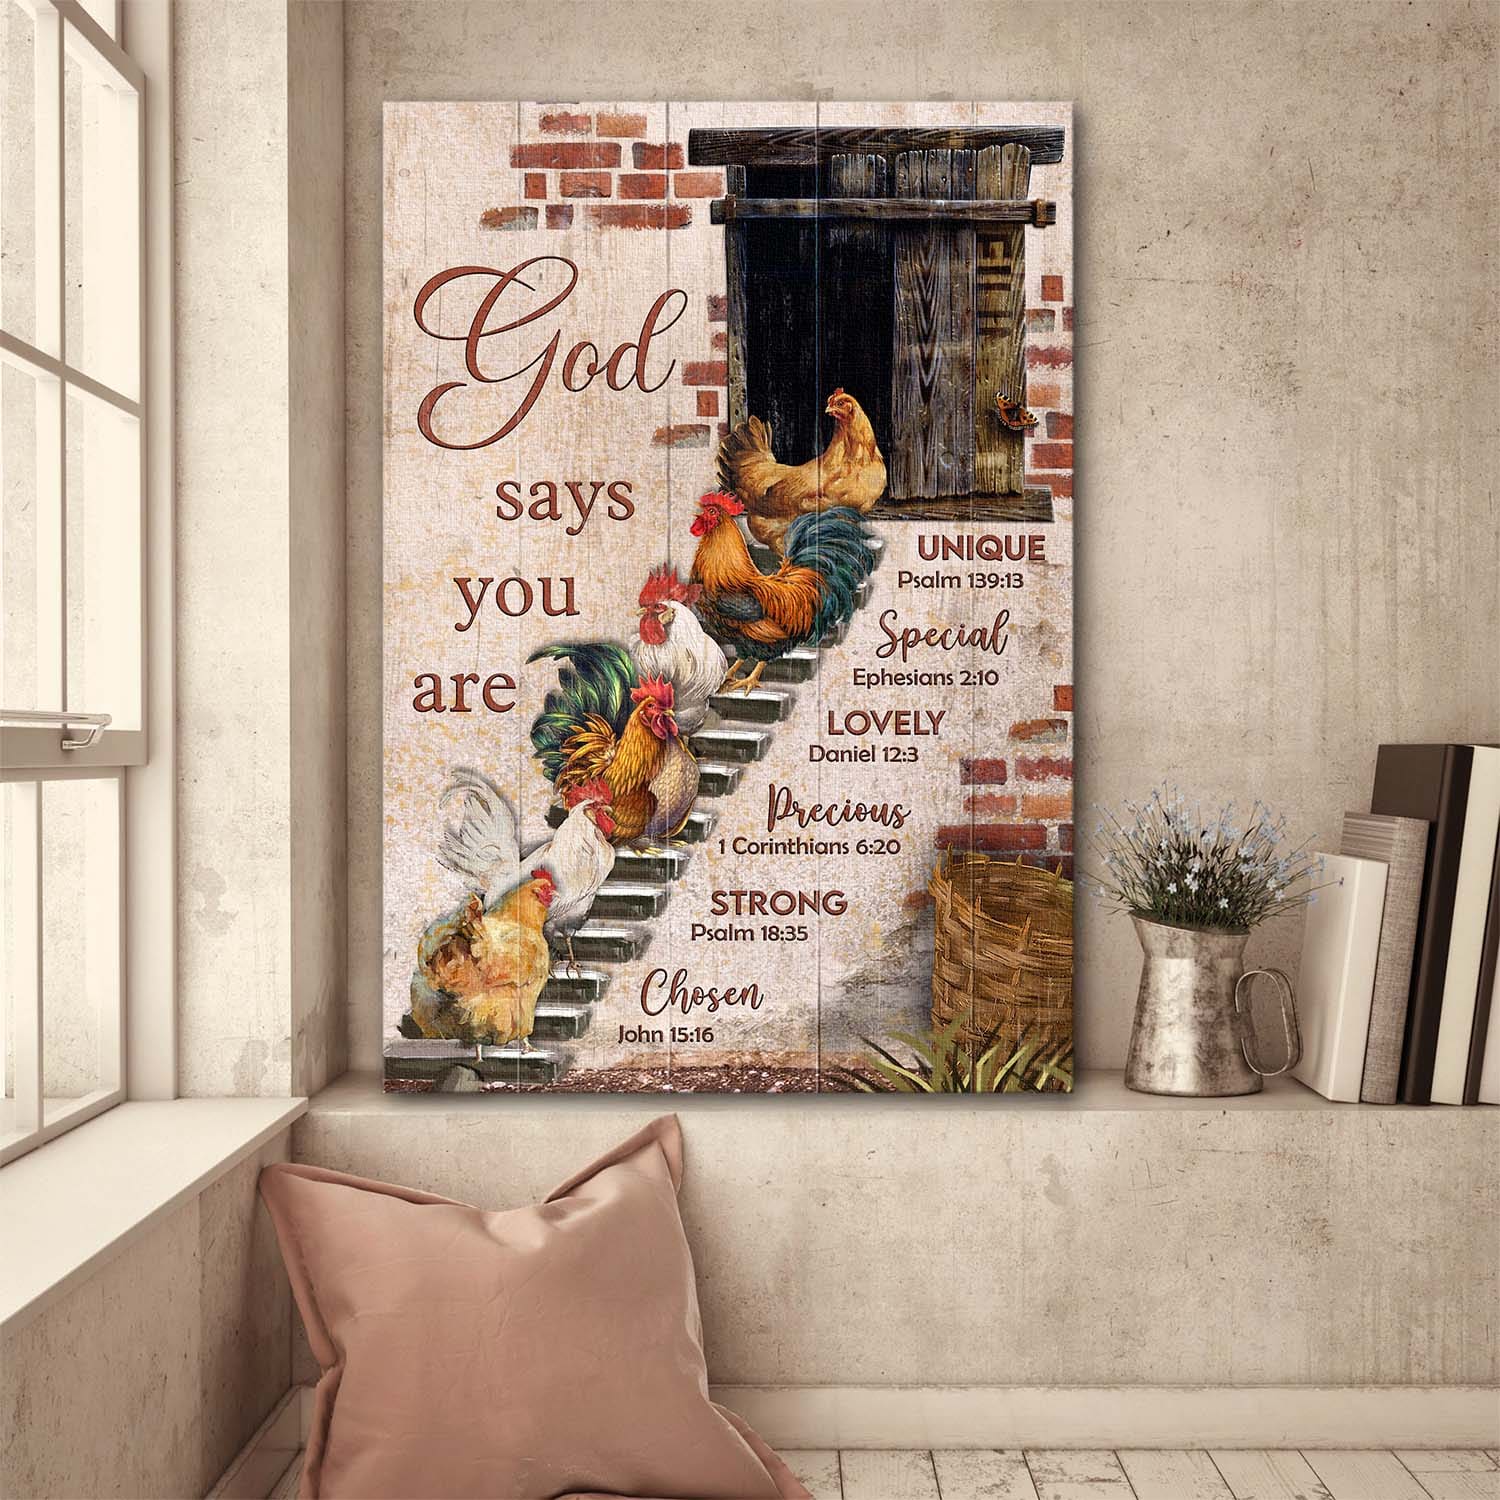 Chicken painting, Wooden stairs, God says you are strong - Jesus Portrait Canvas Prints, Wall Art